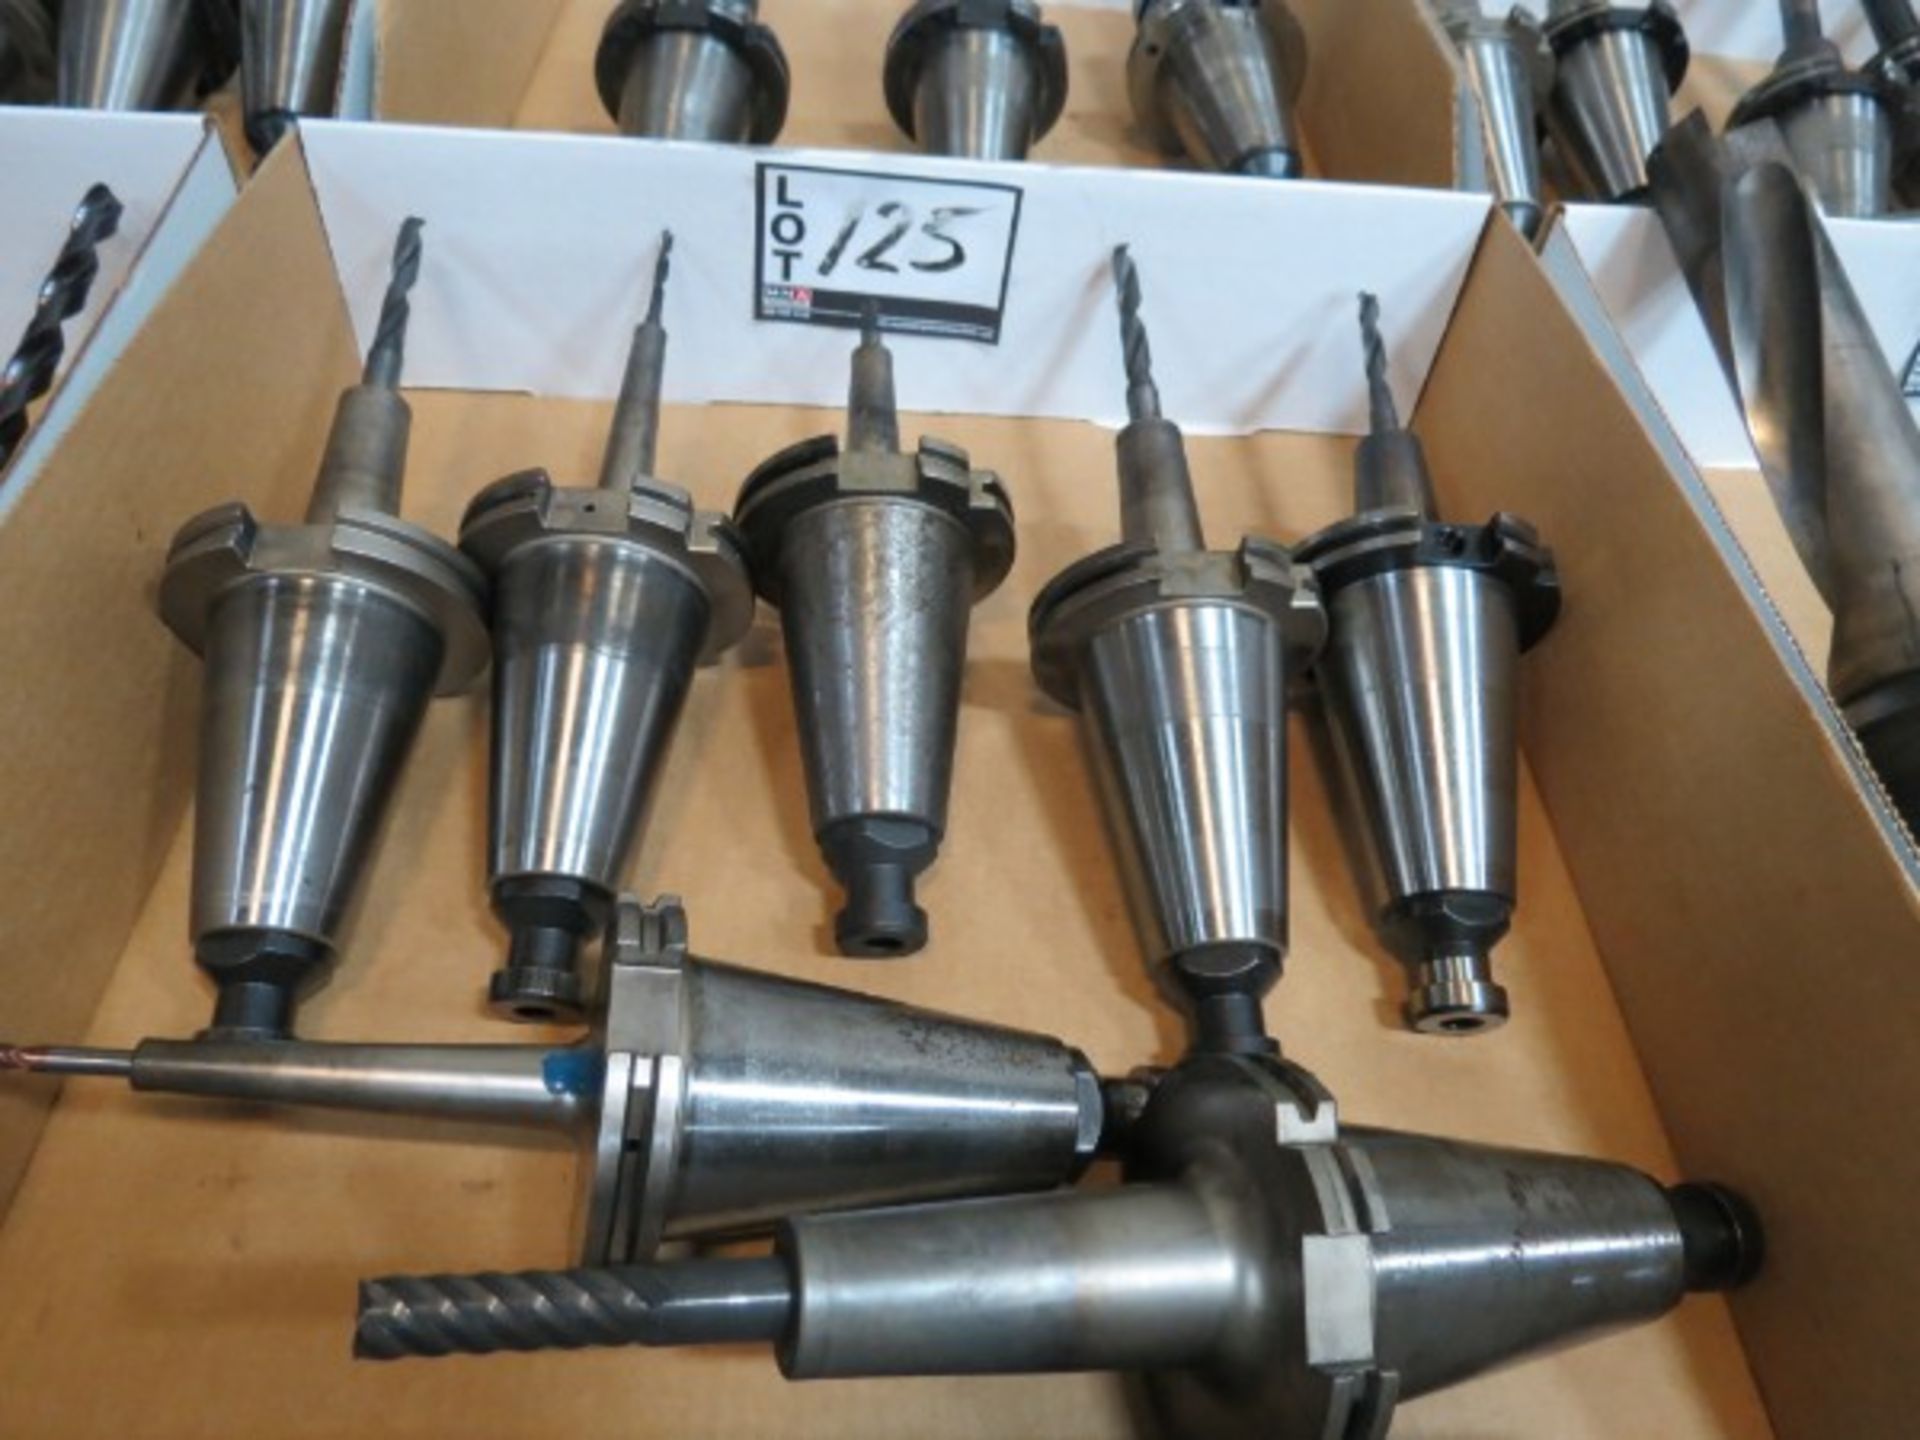 Assorted SK 50 Shrink In Tool Holders